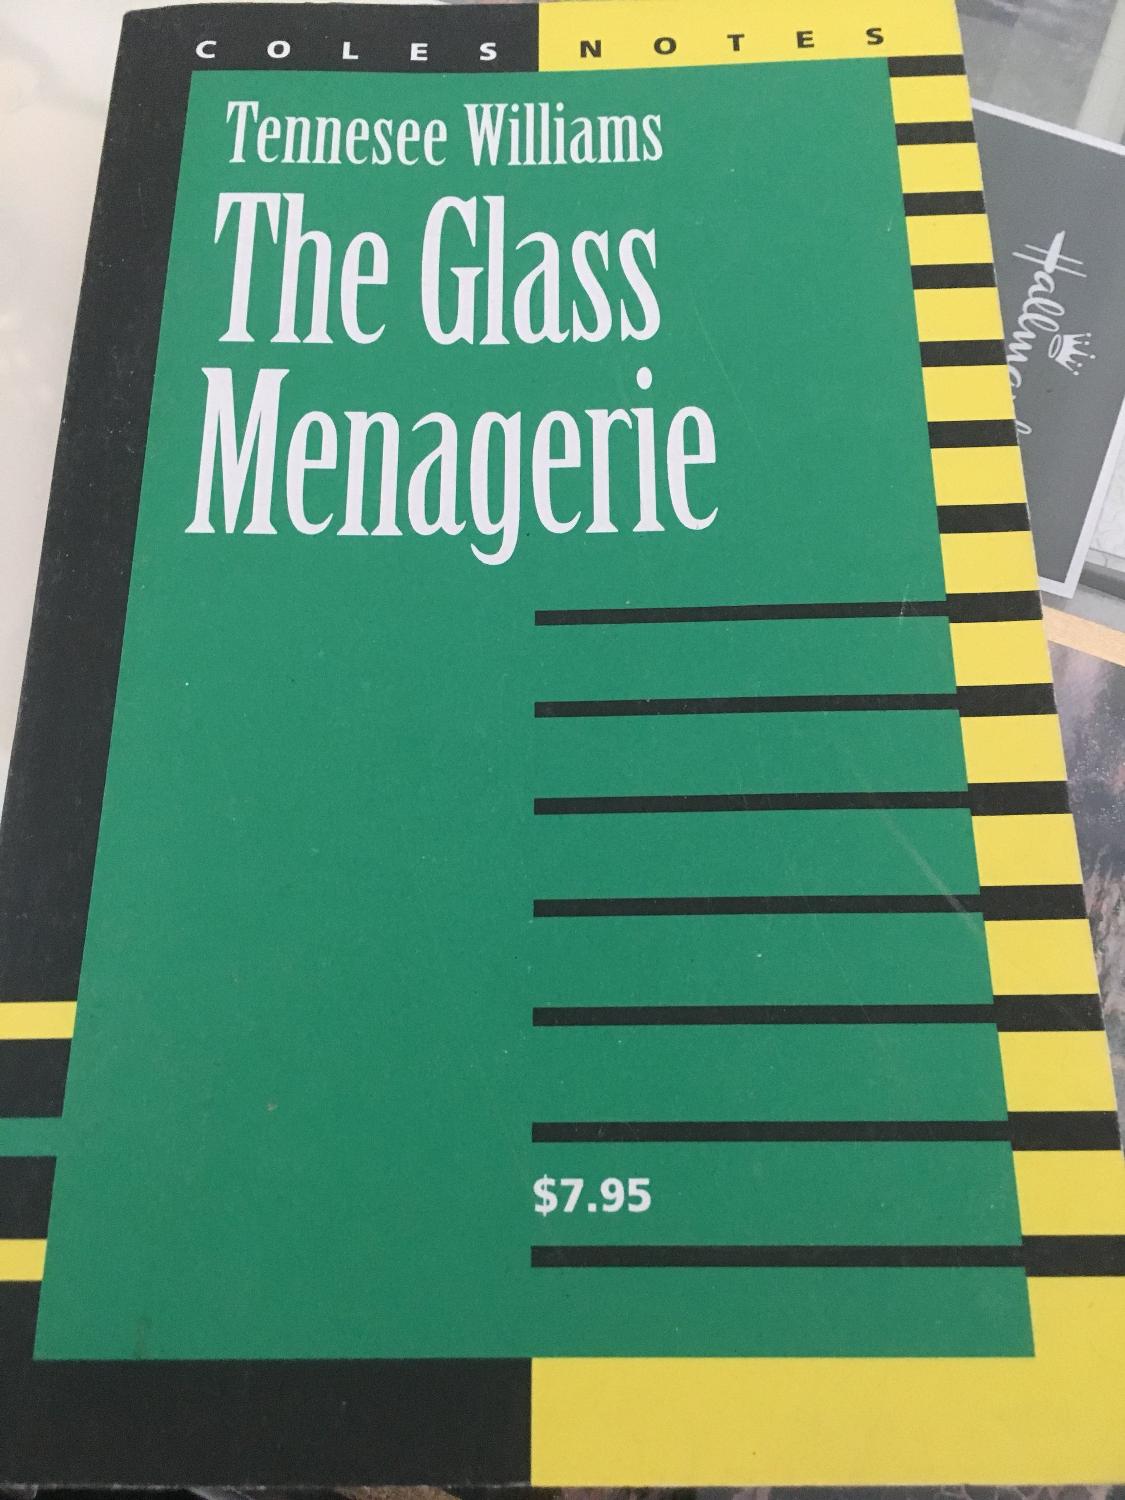 Coles Notes - Williams: The Glass Menagerie